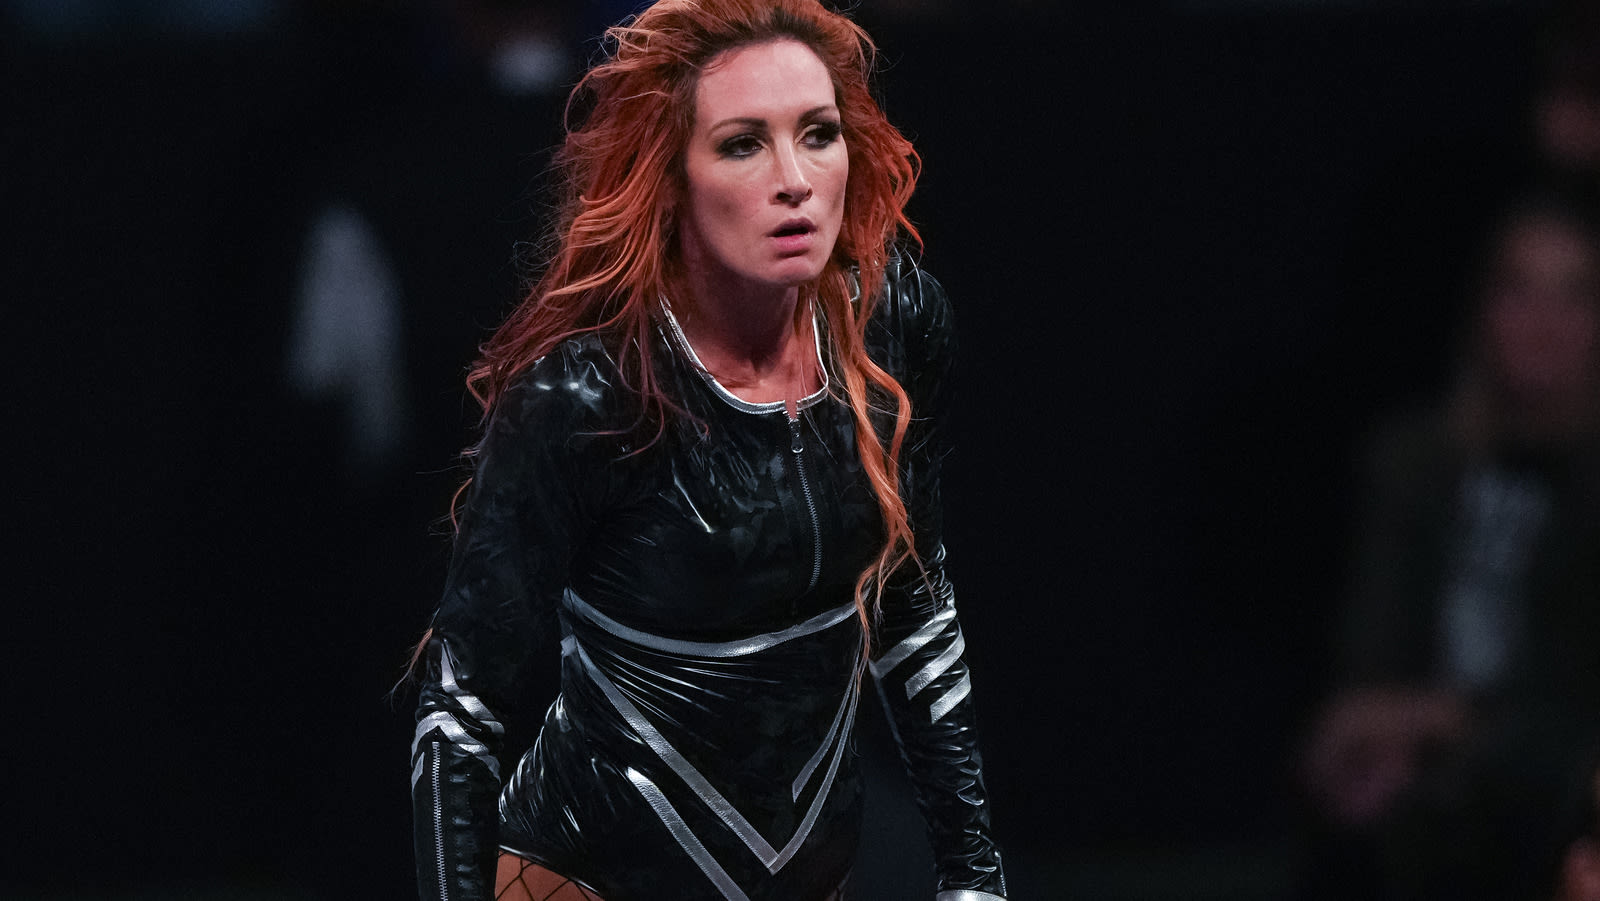 Ex-WWE Star Becky Lynch Shares Reflective Instagram Post: 'It's Been A Helluva Career' - Wrestling Inc.